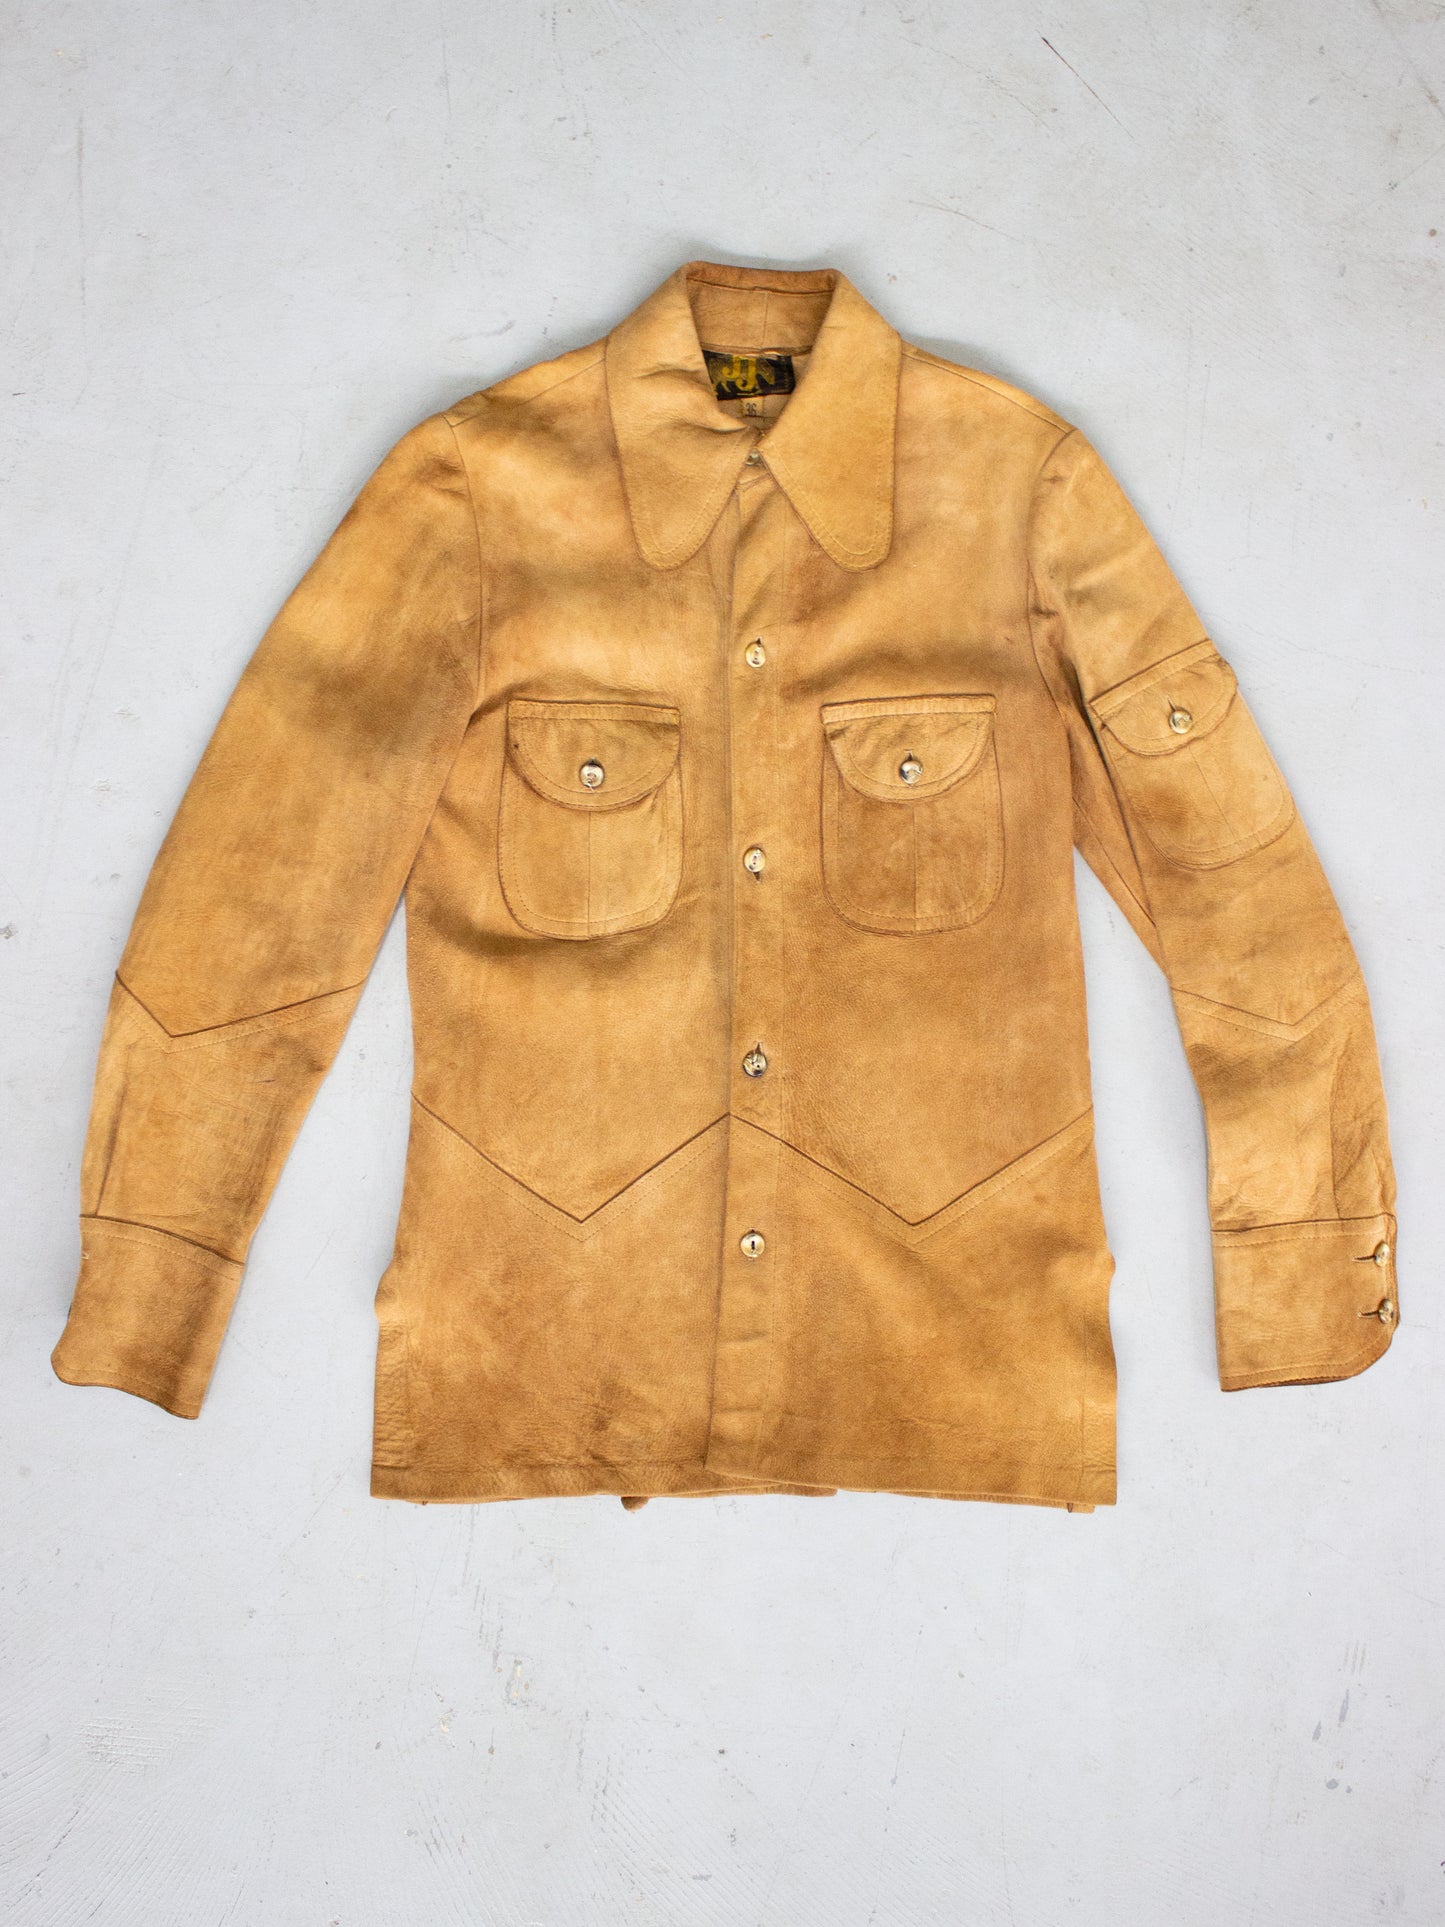 1970's Buckskin Suede Leather Jacket By JJ Made In Canada (Small)